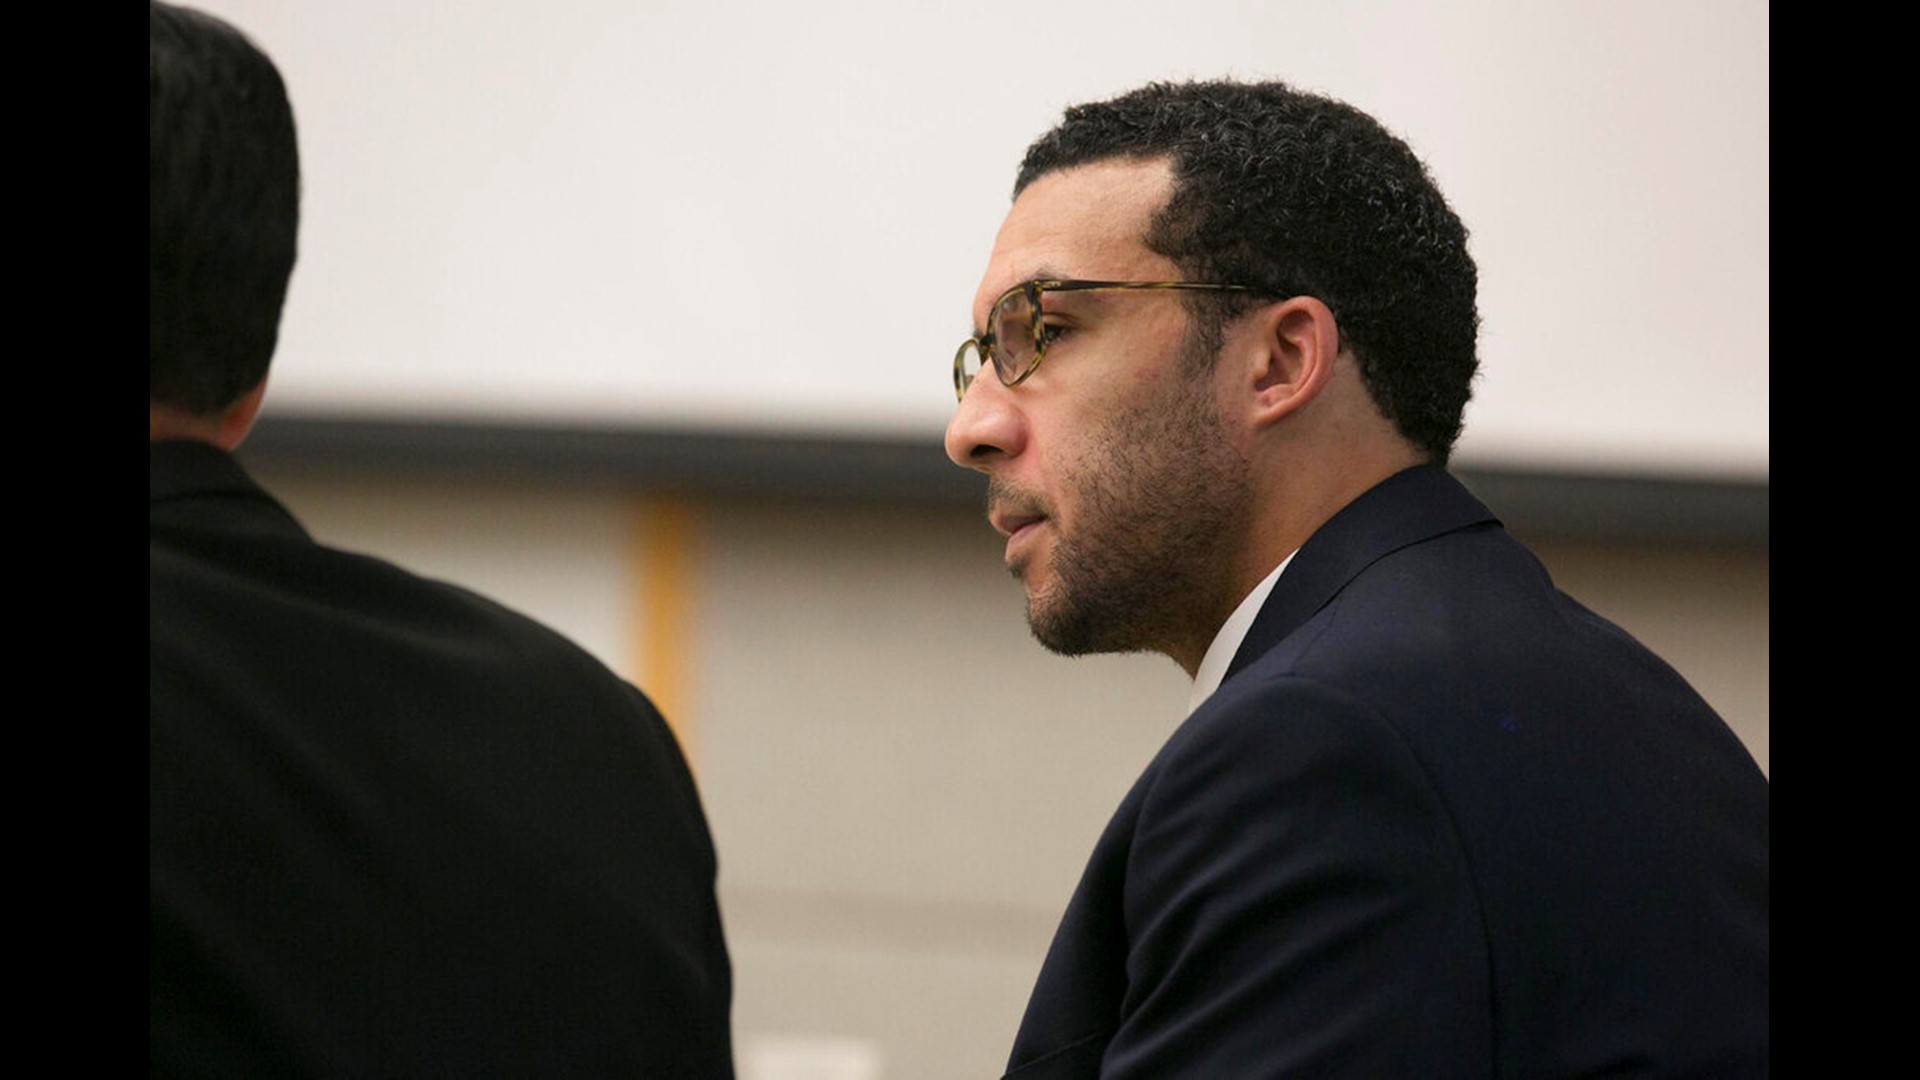 Former NFL player Kellen Winslow Jr. has been convicted of raping a 58-year-old homeless woman last year north of San Diego.

A jury returned the verdict Monday in San Diego Superior Court in Vista but was continuing to deliberate on two more counts of rape involving a hitchhiker and an unconscious teenage girl.